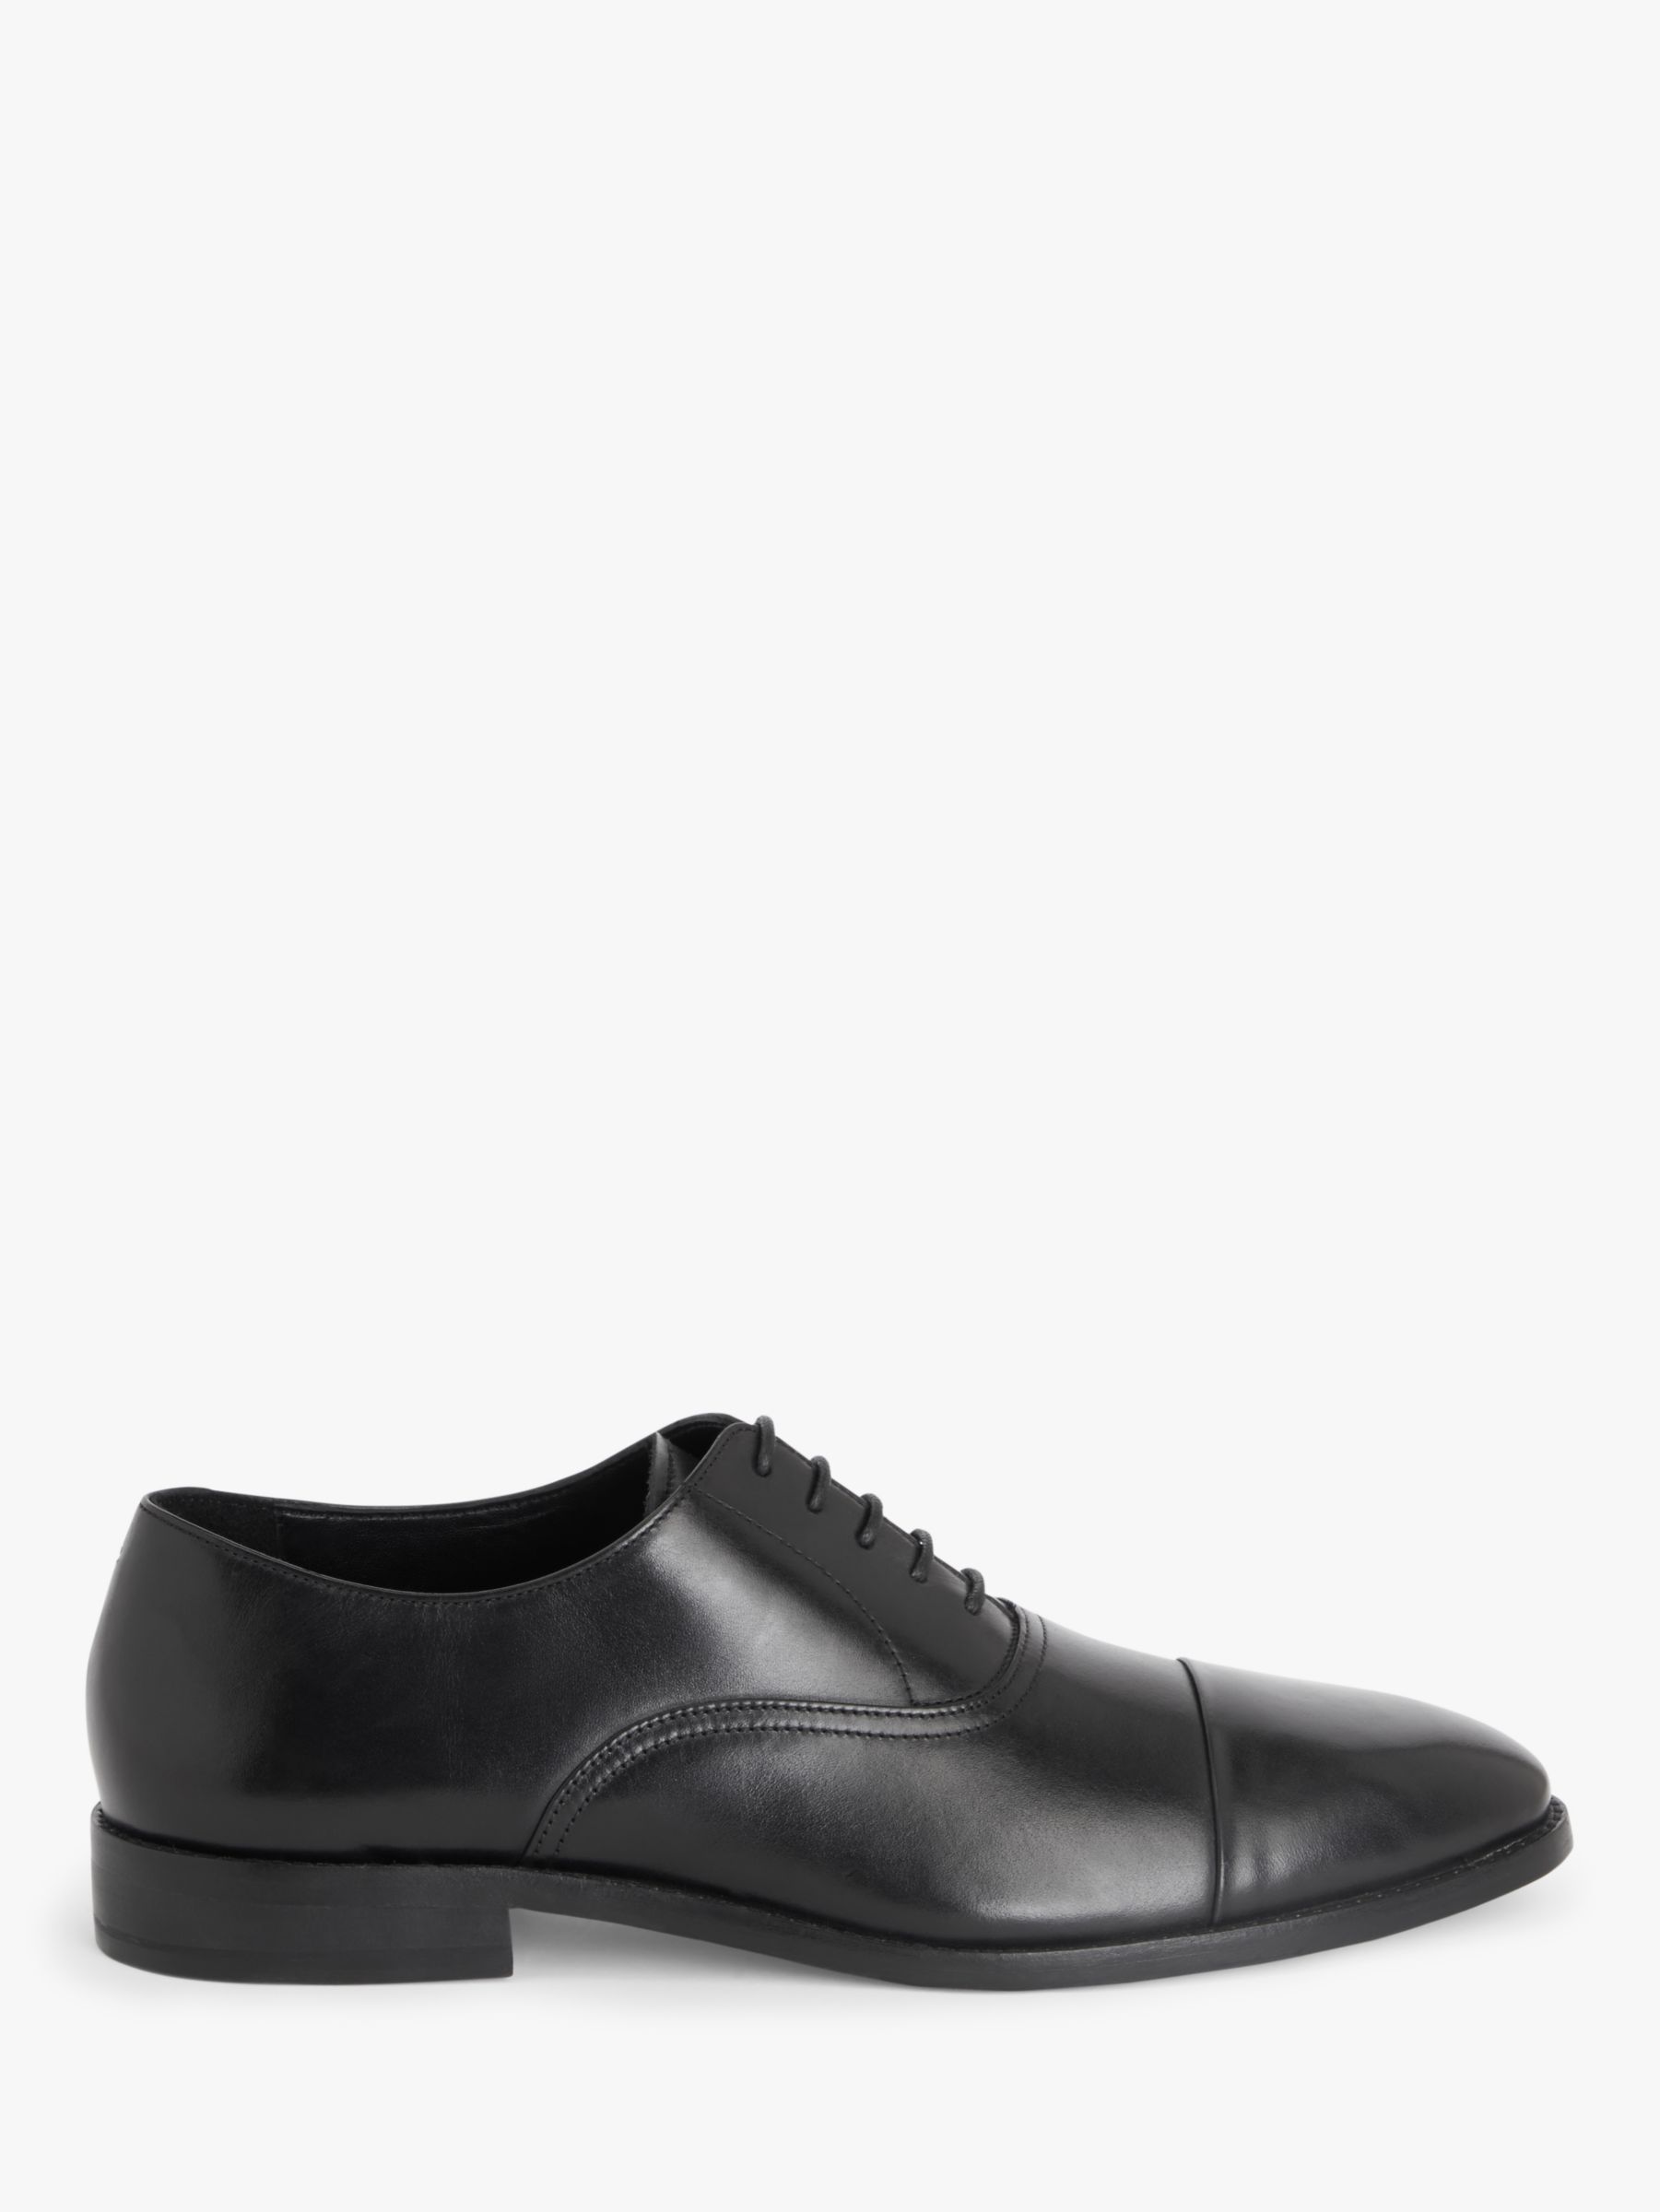 John Lewis Formal Leather Sole Oxford Shoes, Black, 9